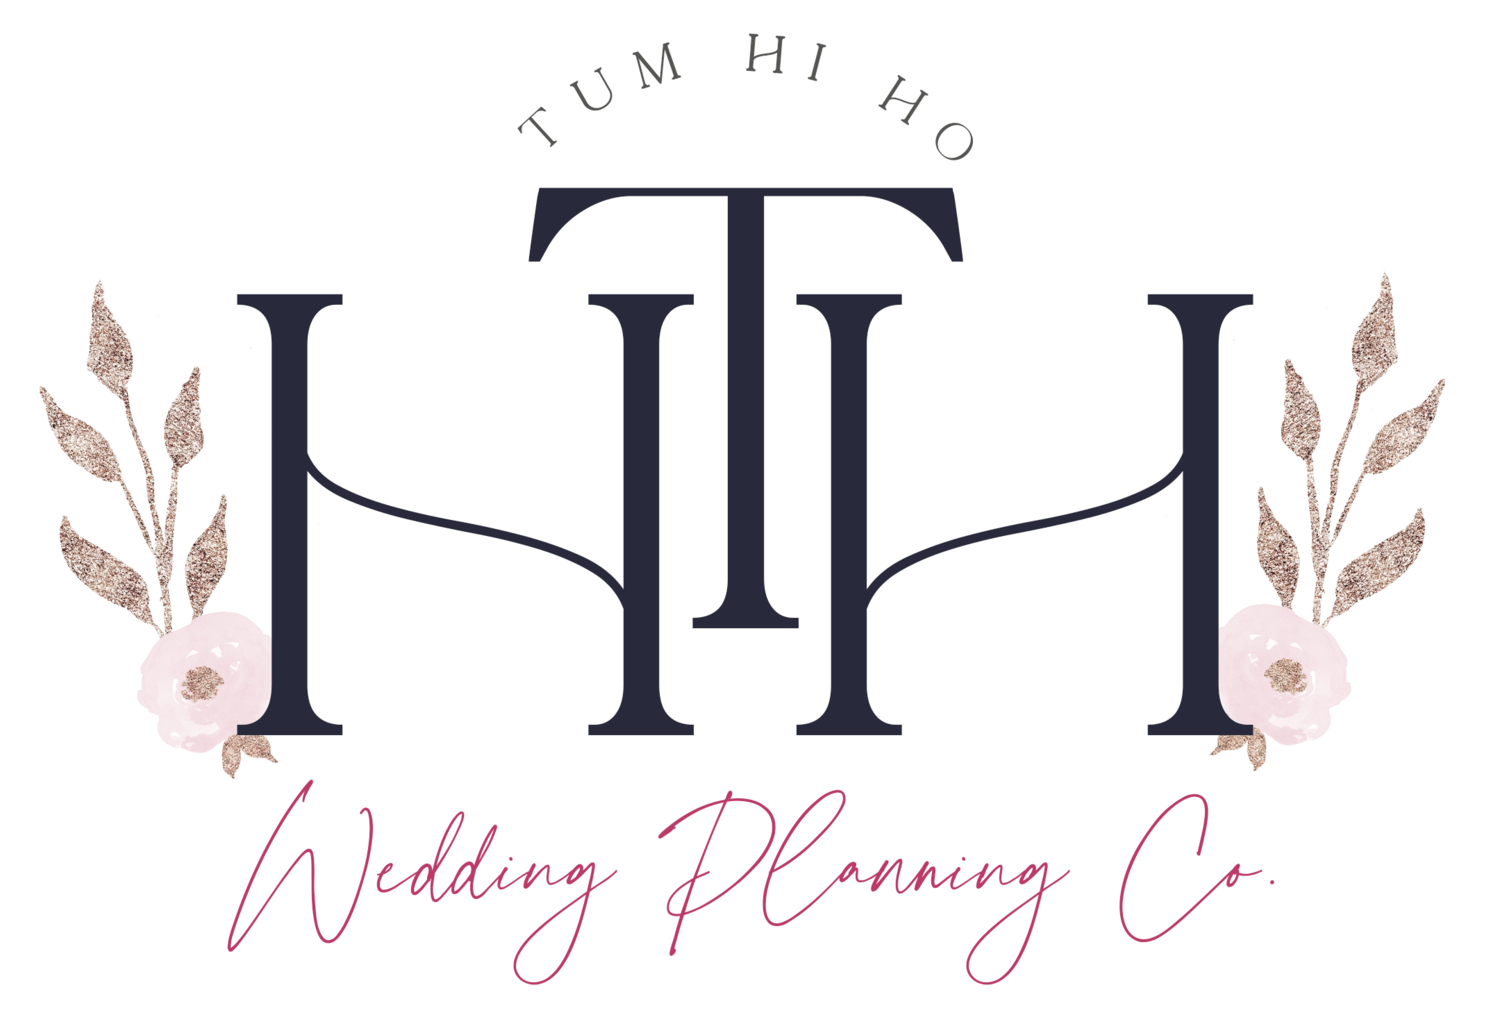 Best Indian Wedding Planners in NJ, USA | Tum Hi Ho Events